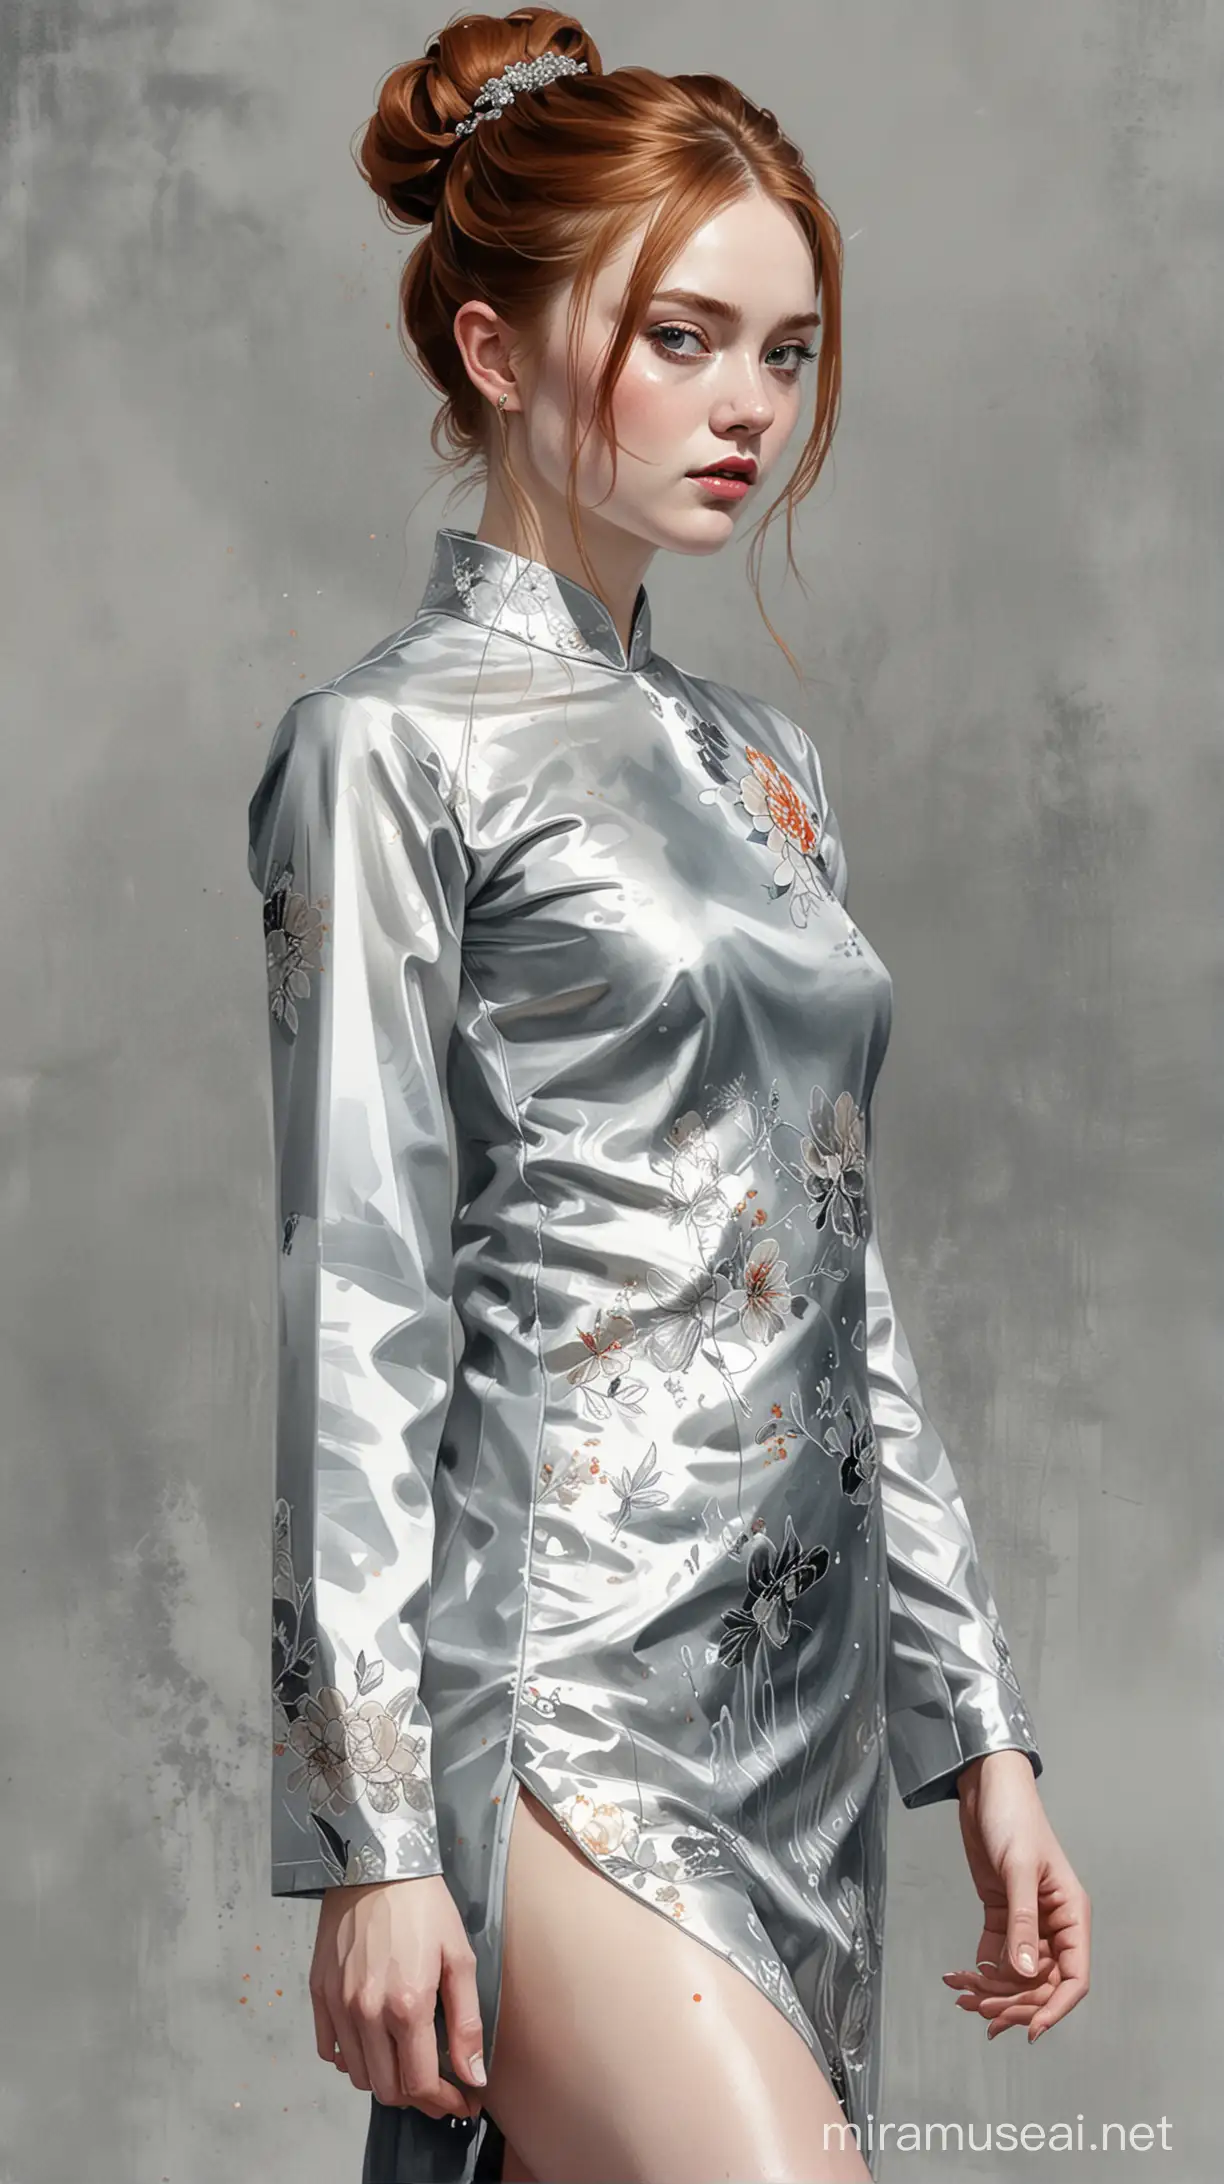 Alex Maleev illustration depicting Sadie Sink wearing silver qipao with leg slit, bun hair, watercolor, white background, no distortion, gray palette, insanely high detail, very high quality, seen from below